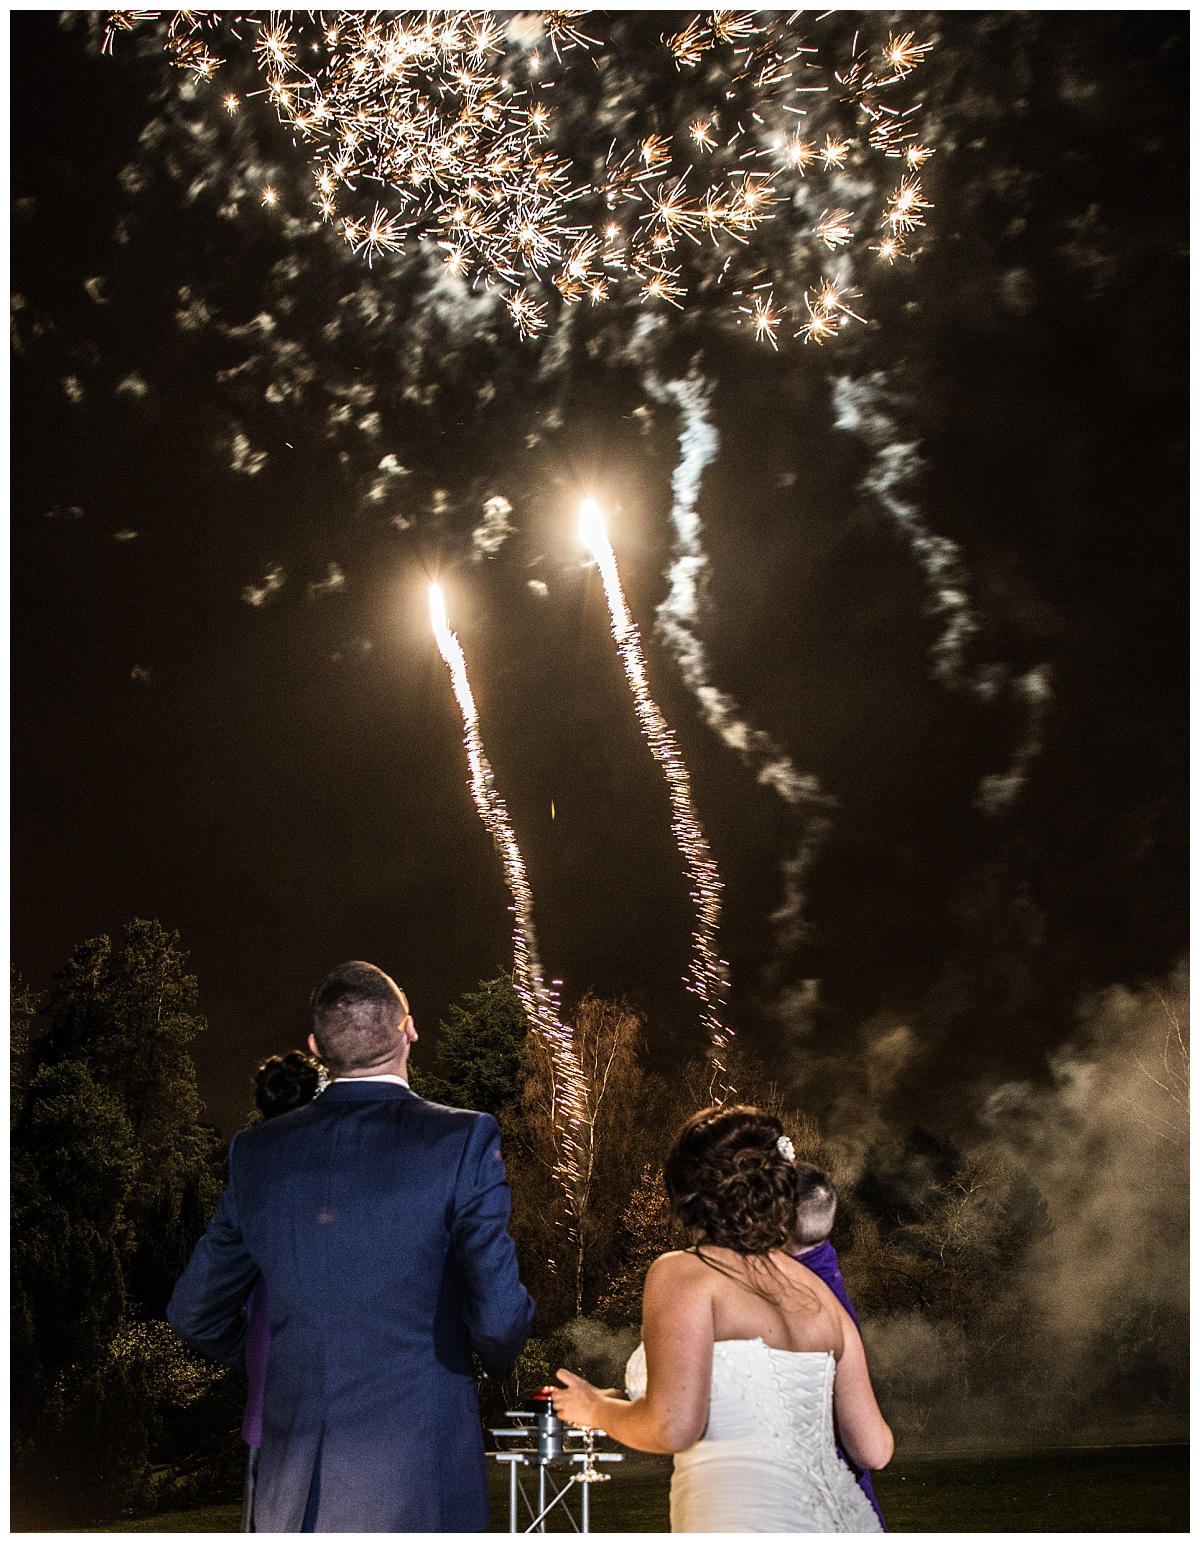 Wedding Photography Manchester - Jemma and Mark's Oddfellows On The Park NYE Wedding 98